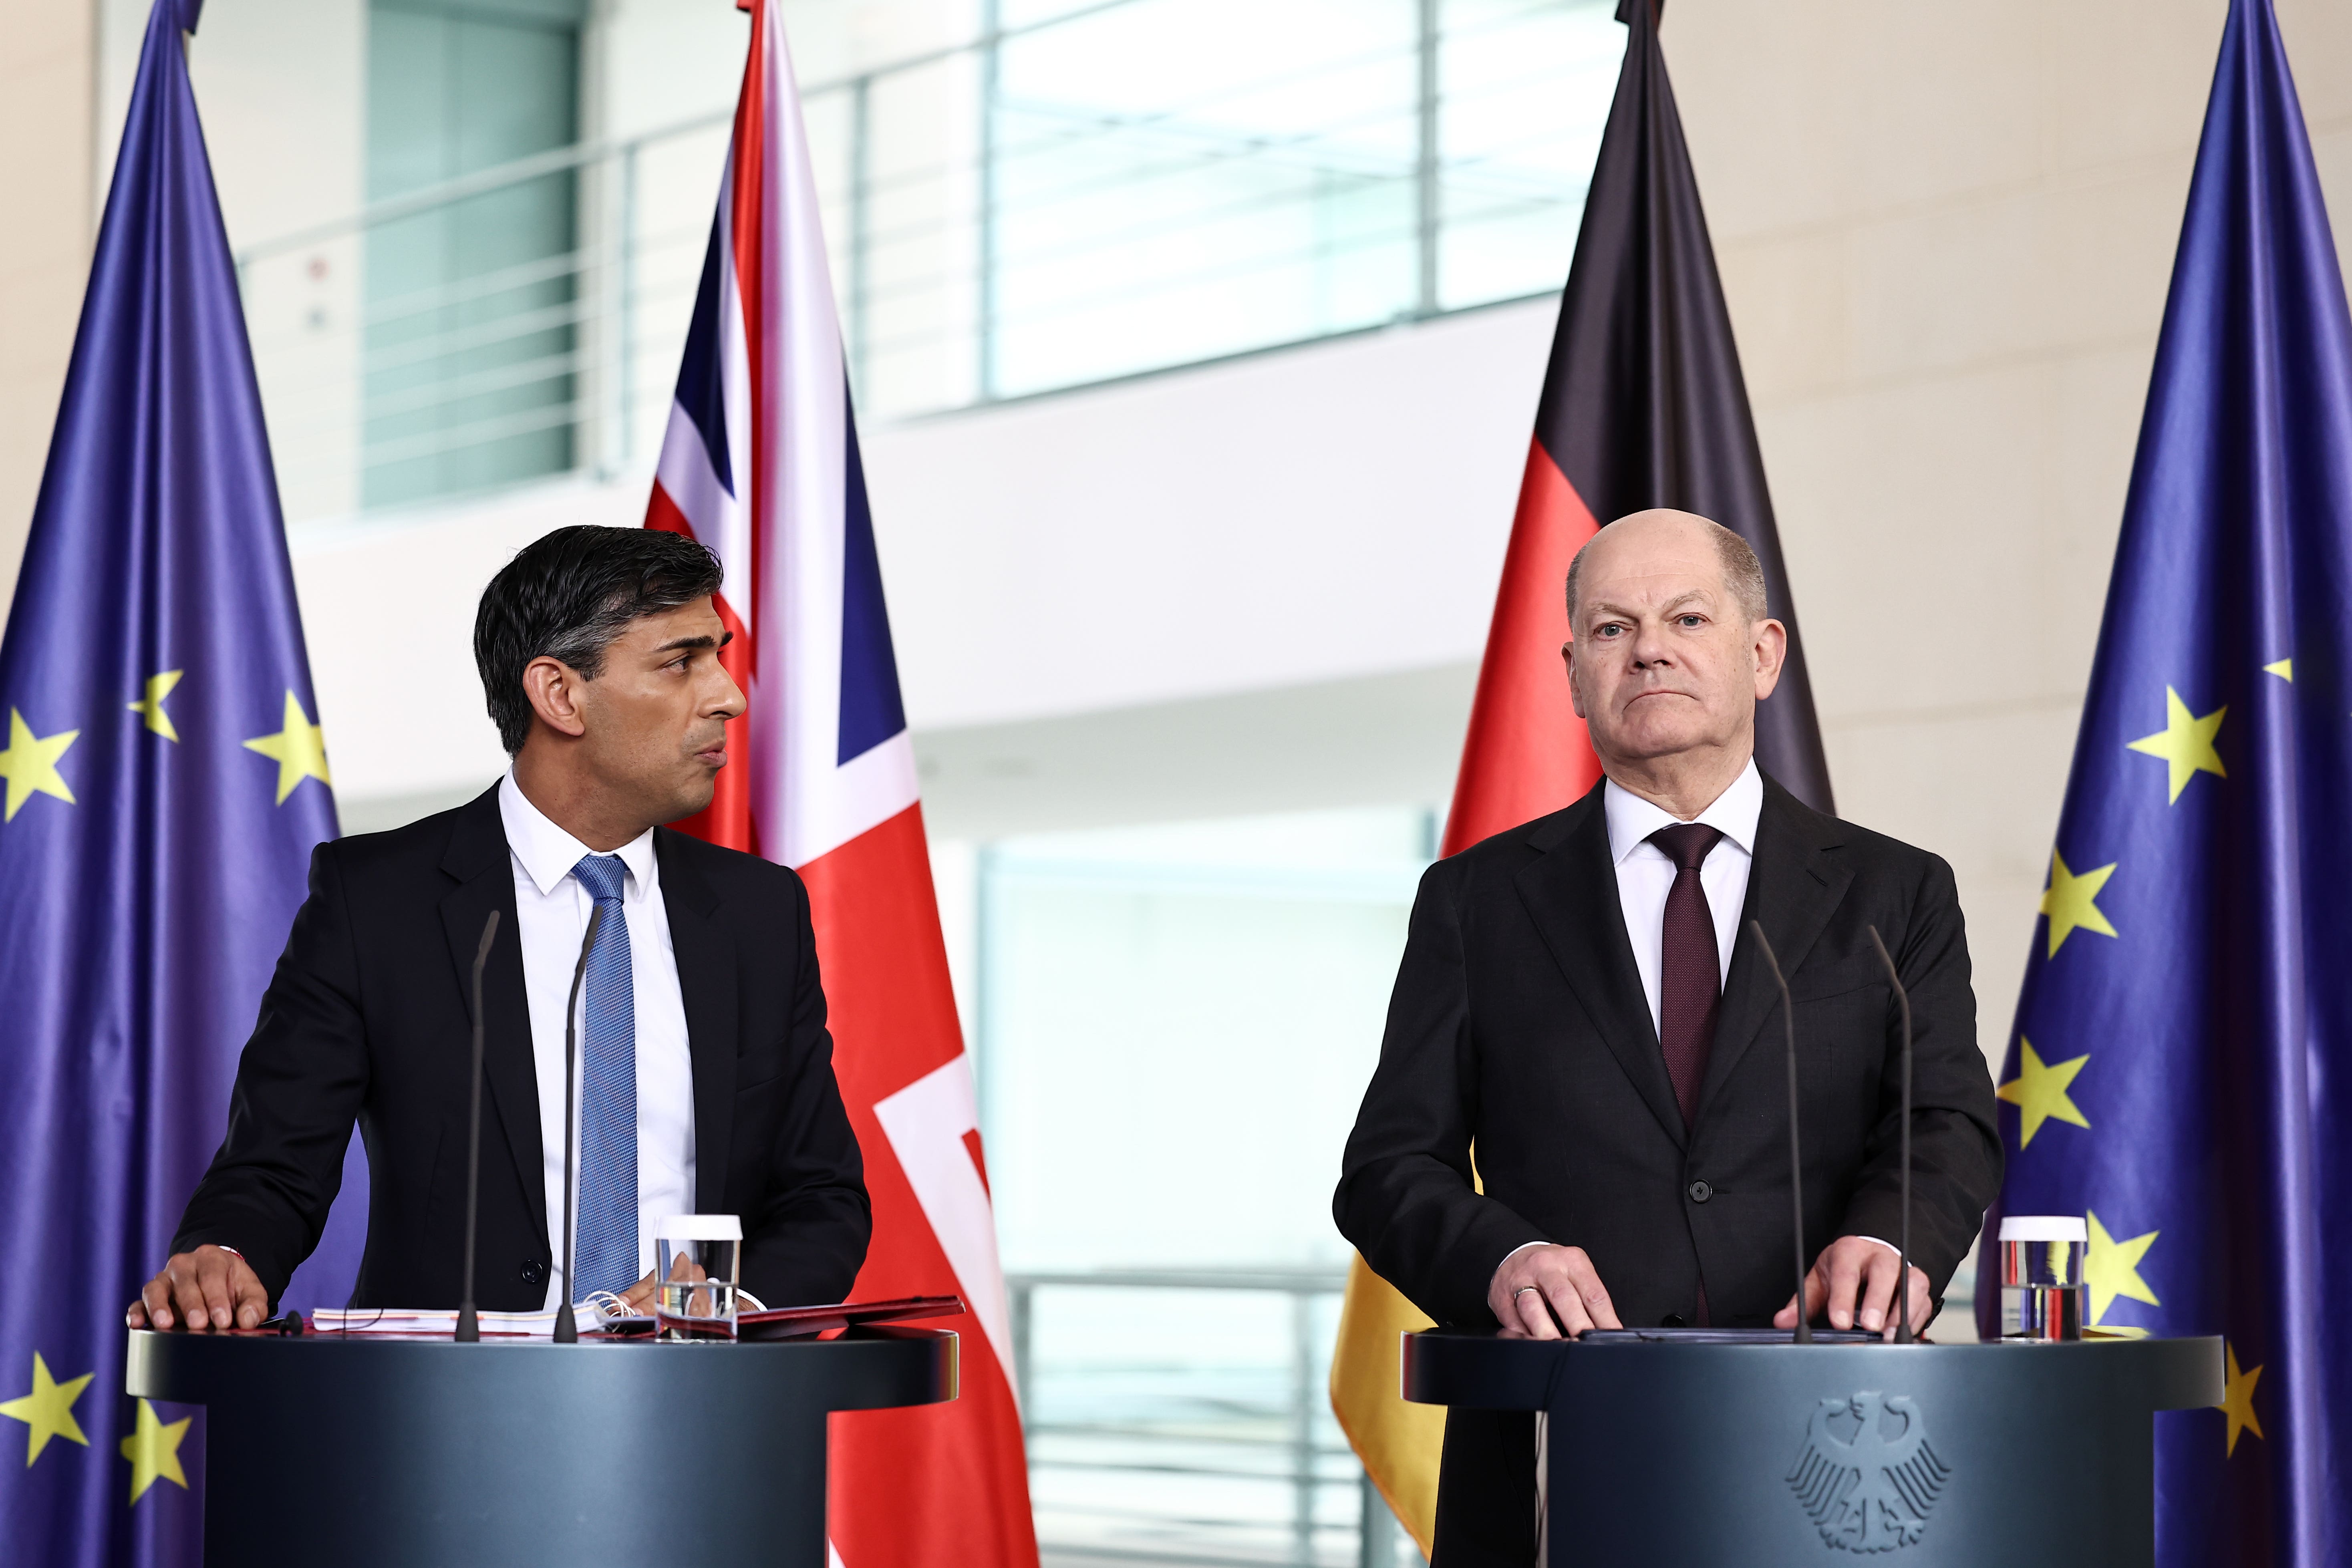 Prime minister Rishi Sunak and Germany’s chancellor Olaf Scholz